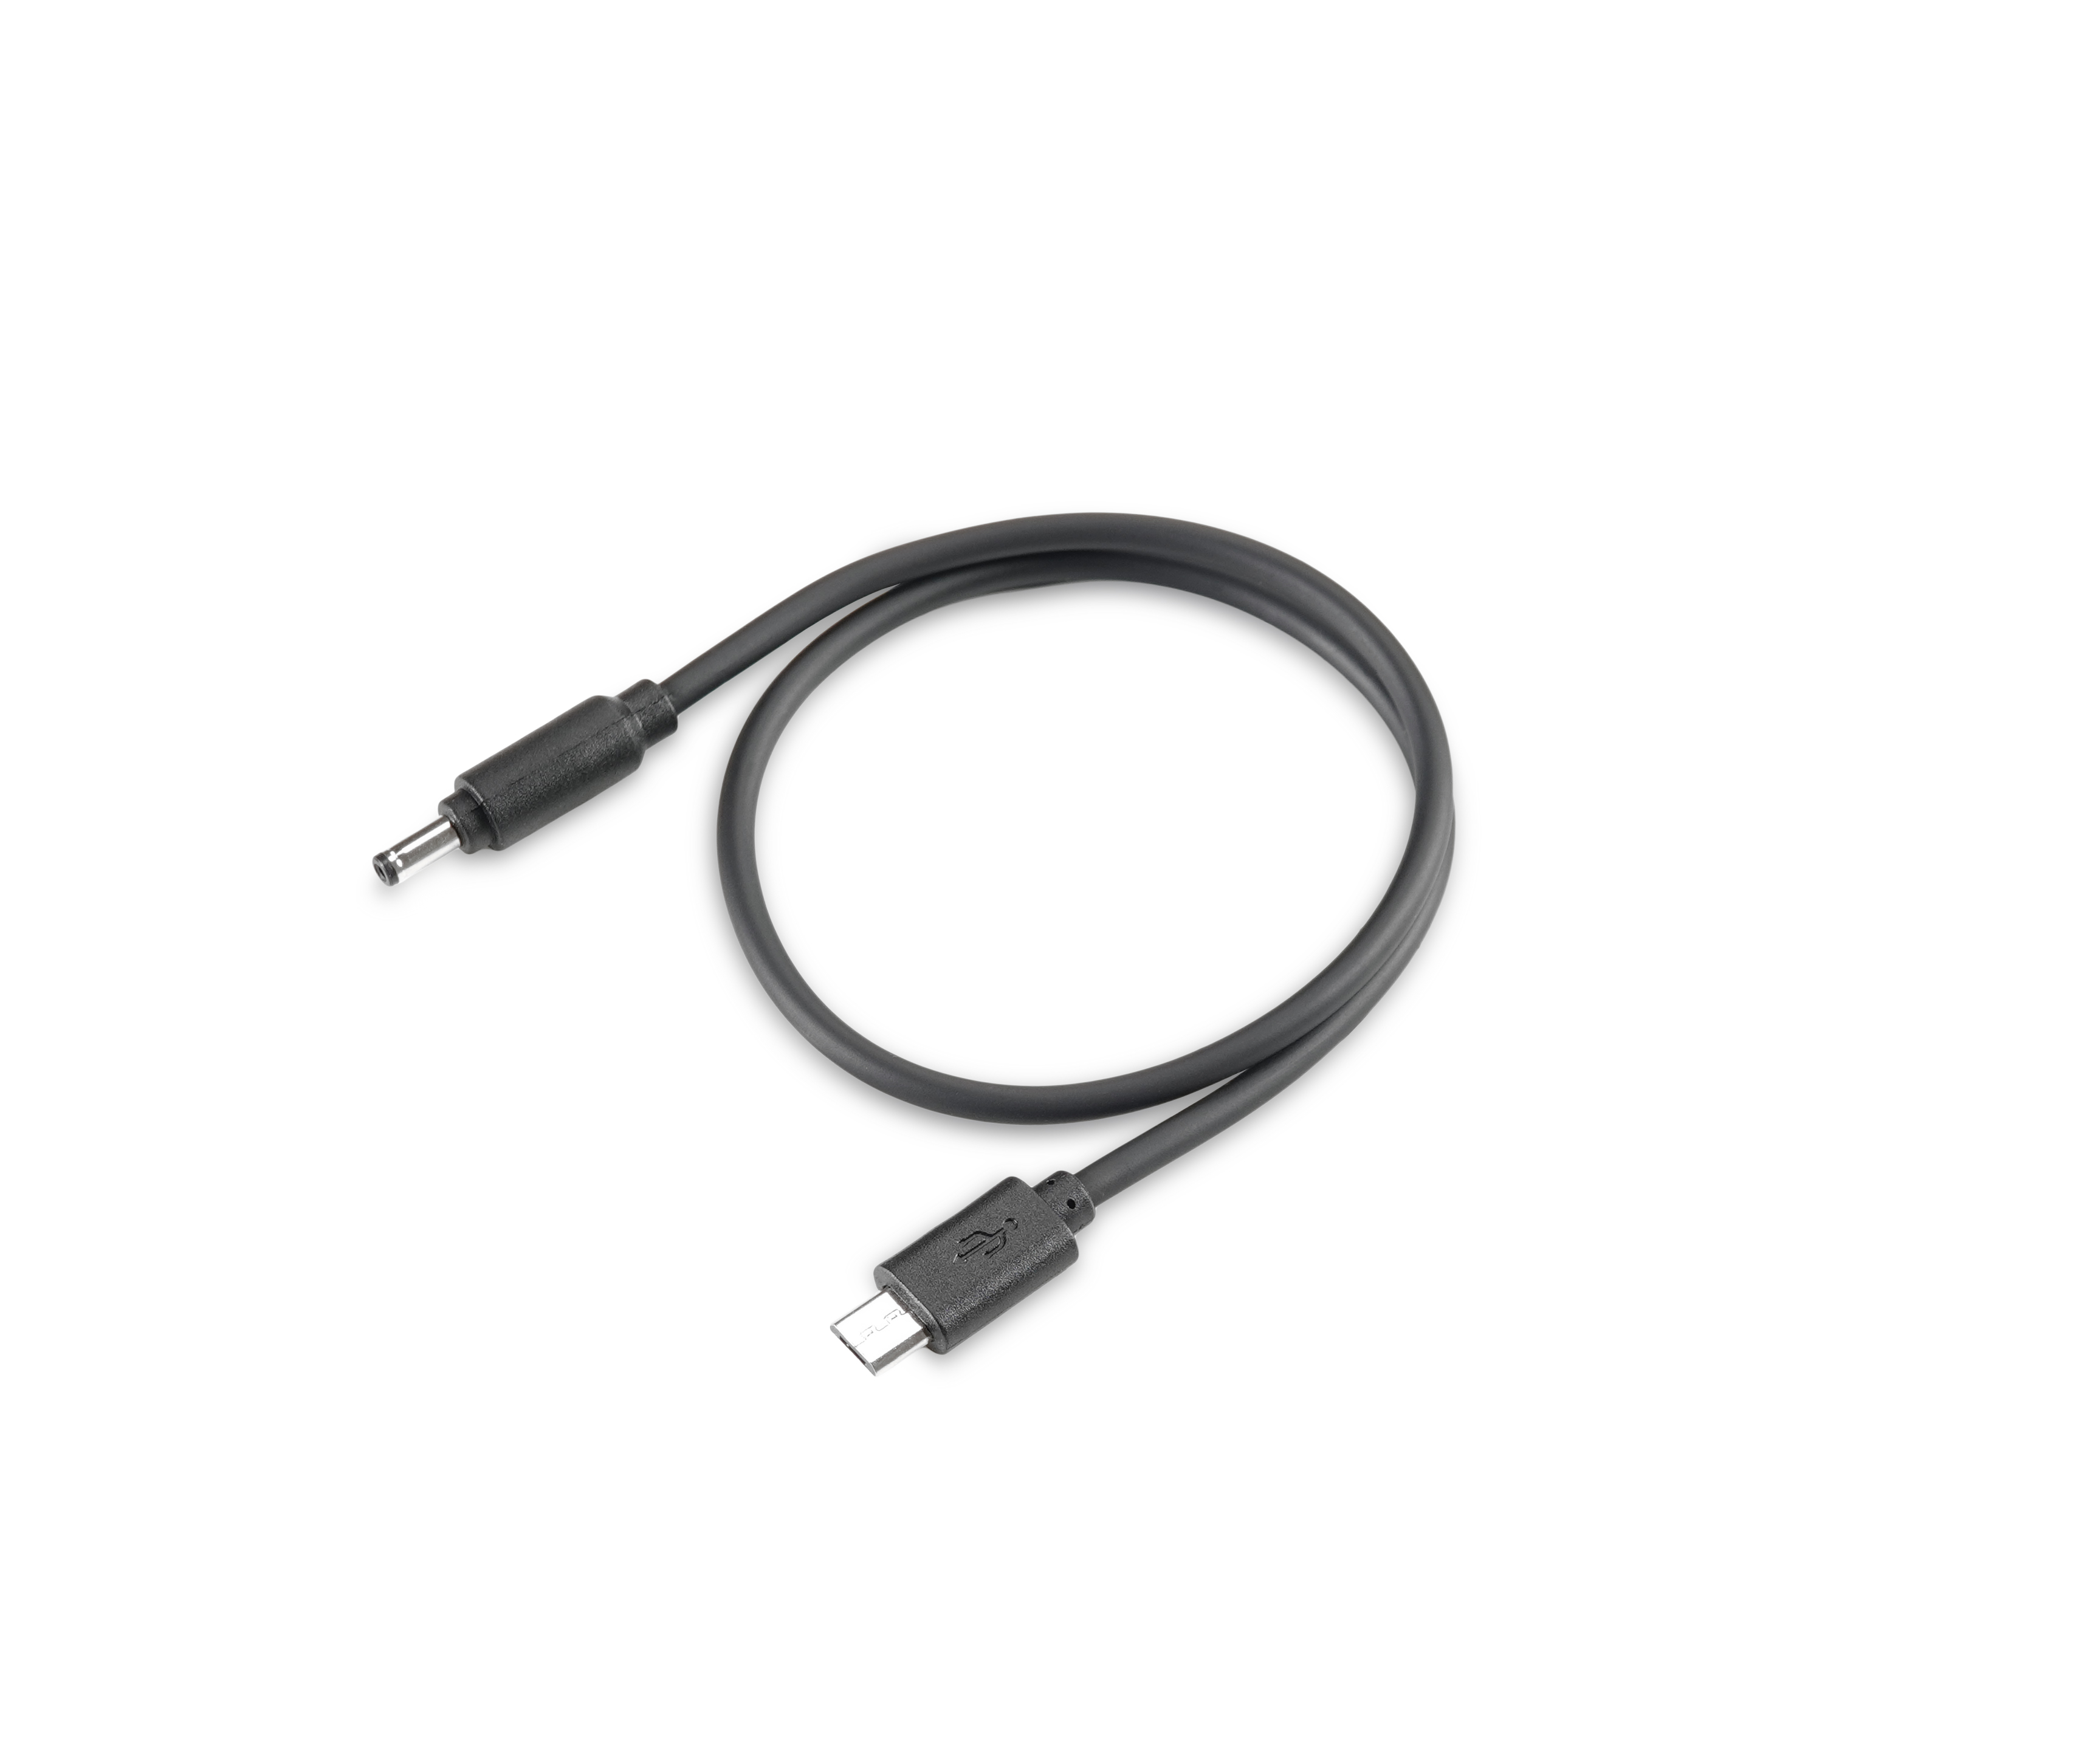 Cable for USB TWO